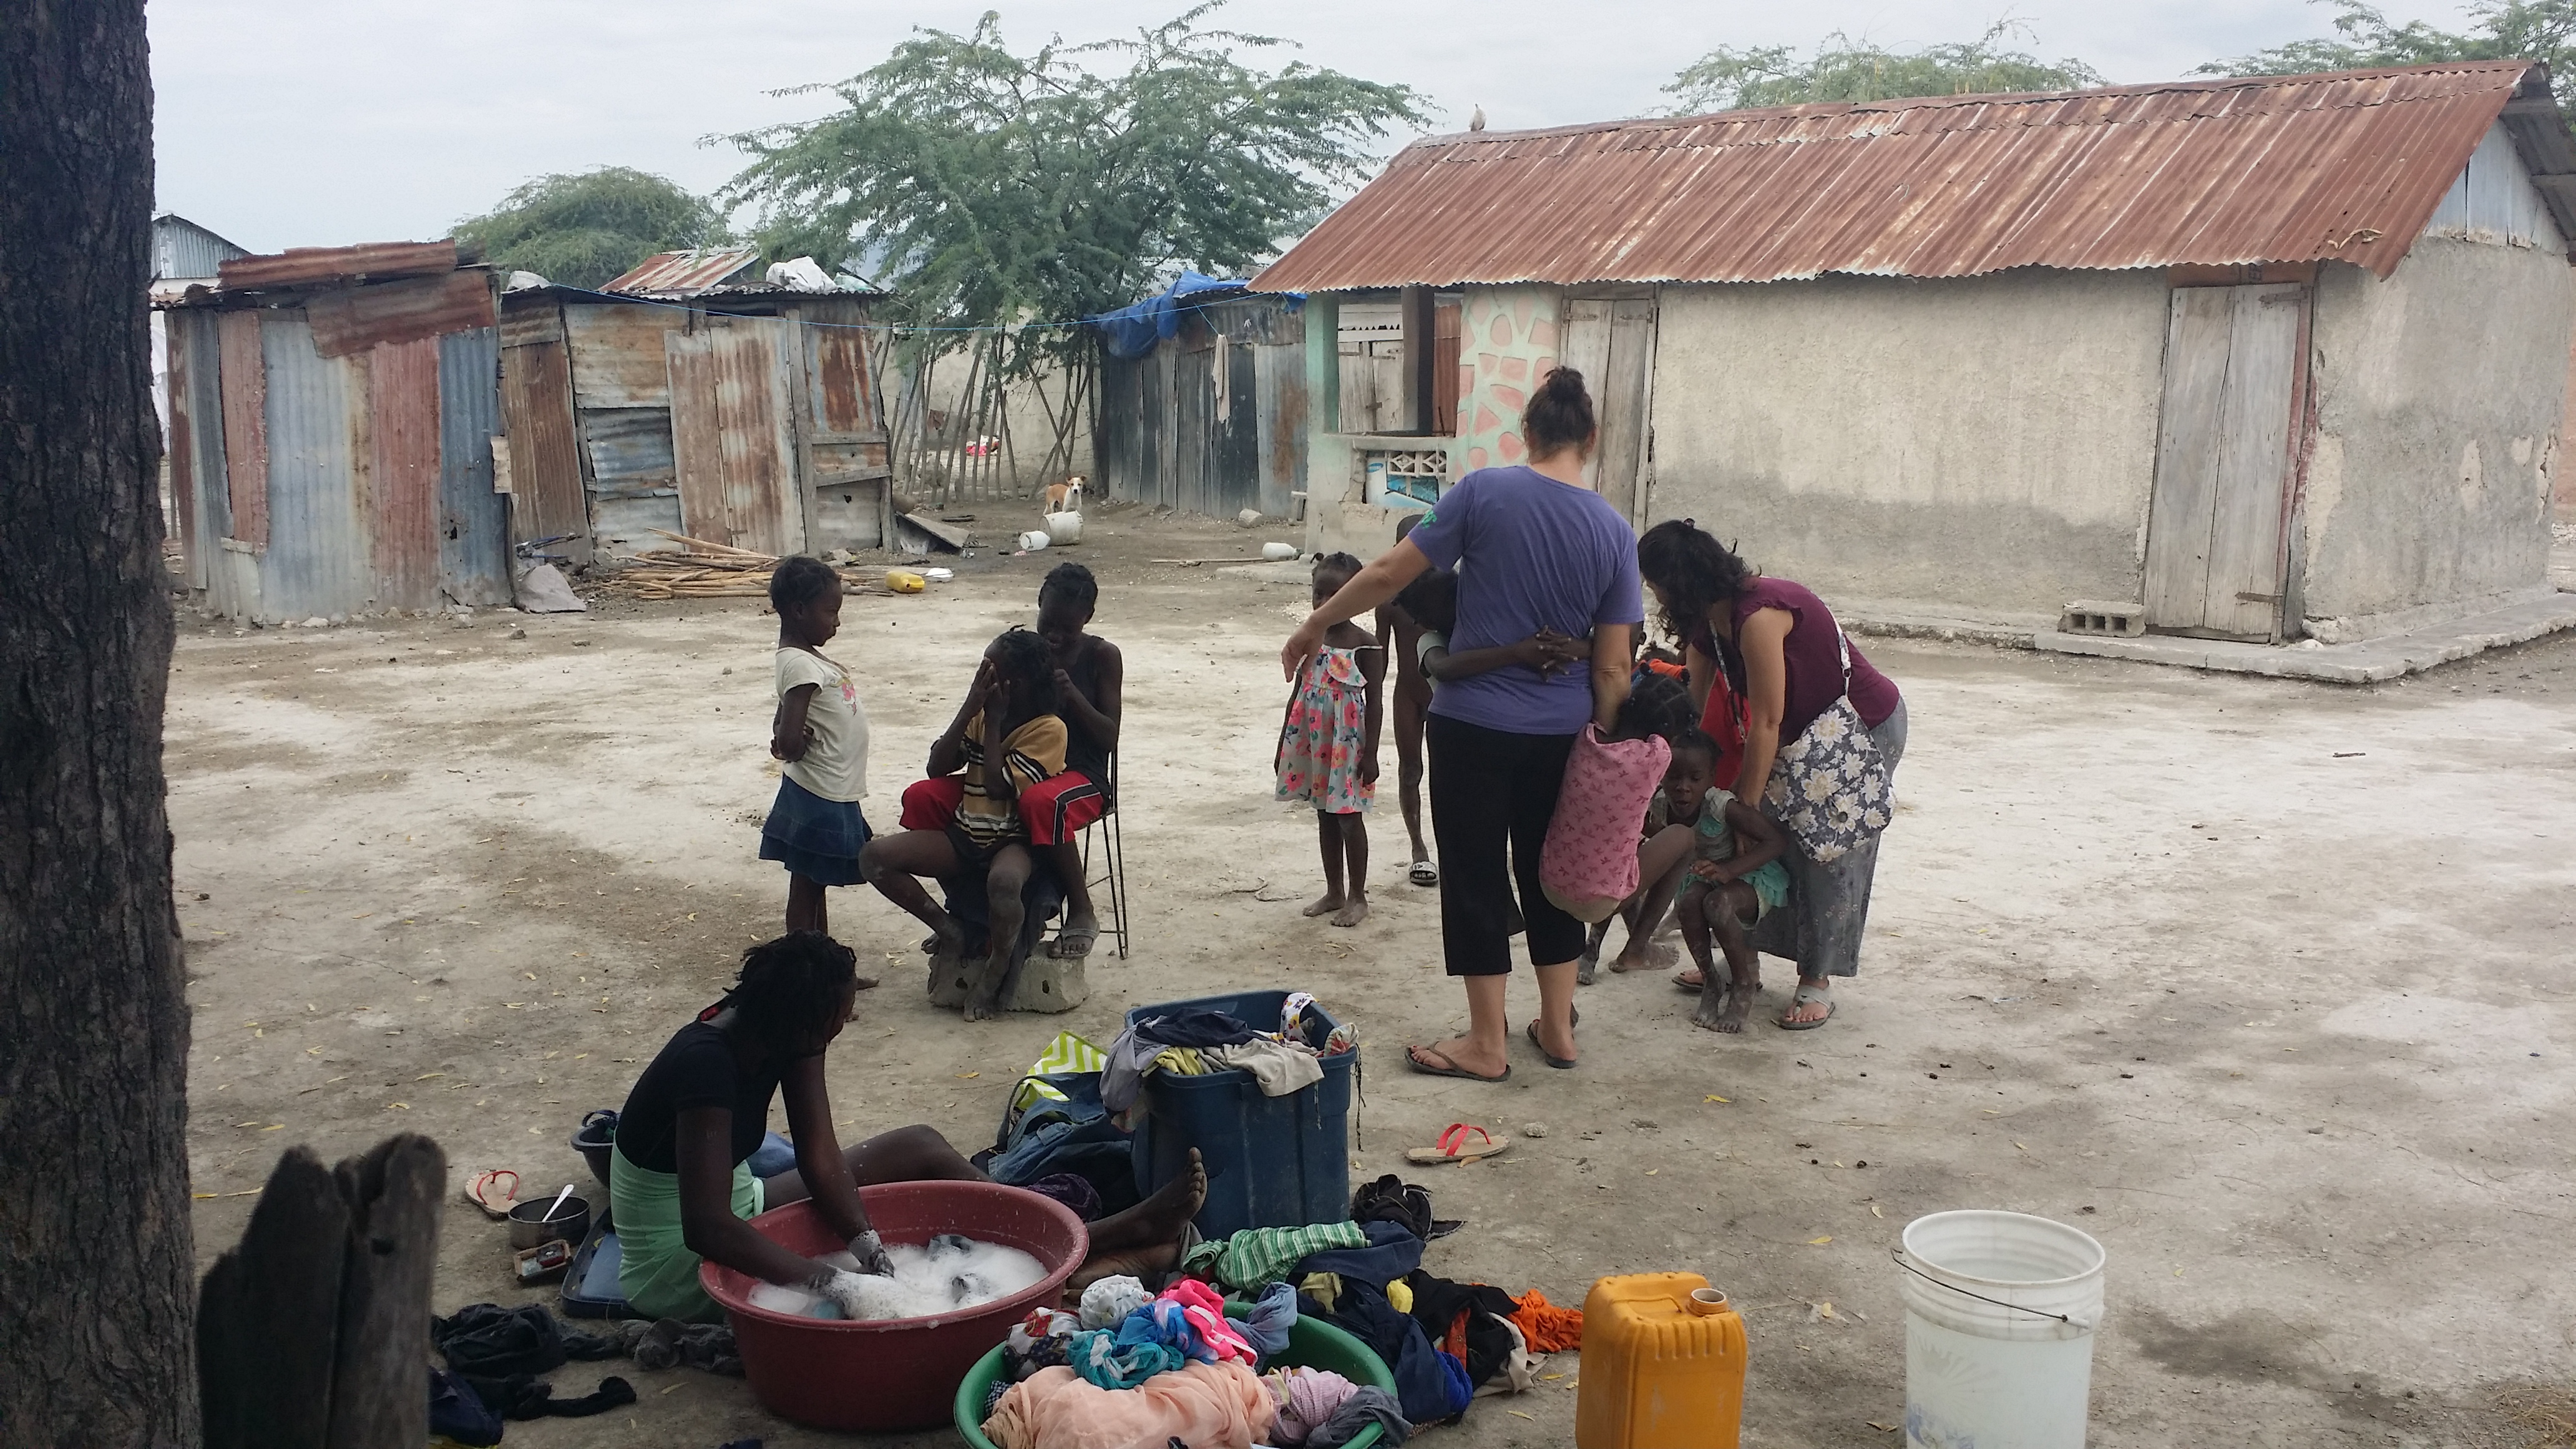 This is a village in the community known as Chambrun, Haiti.  We are currently partnering with Nehemiah Vision Ministry.  They are a Haitian Christian non-profit, 501 (c) (3) ministry operating in Haiti.